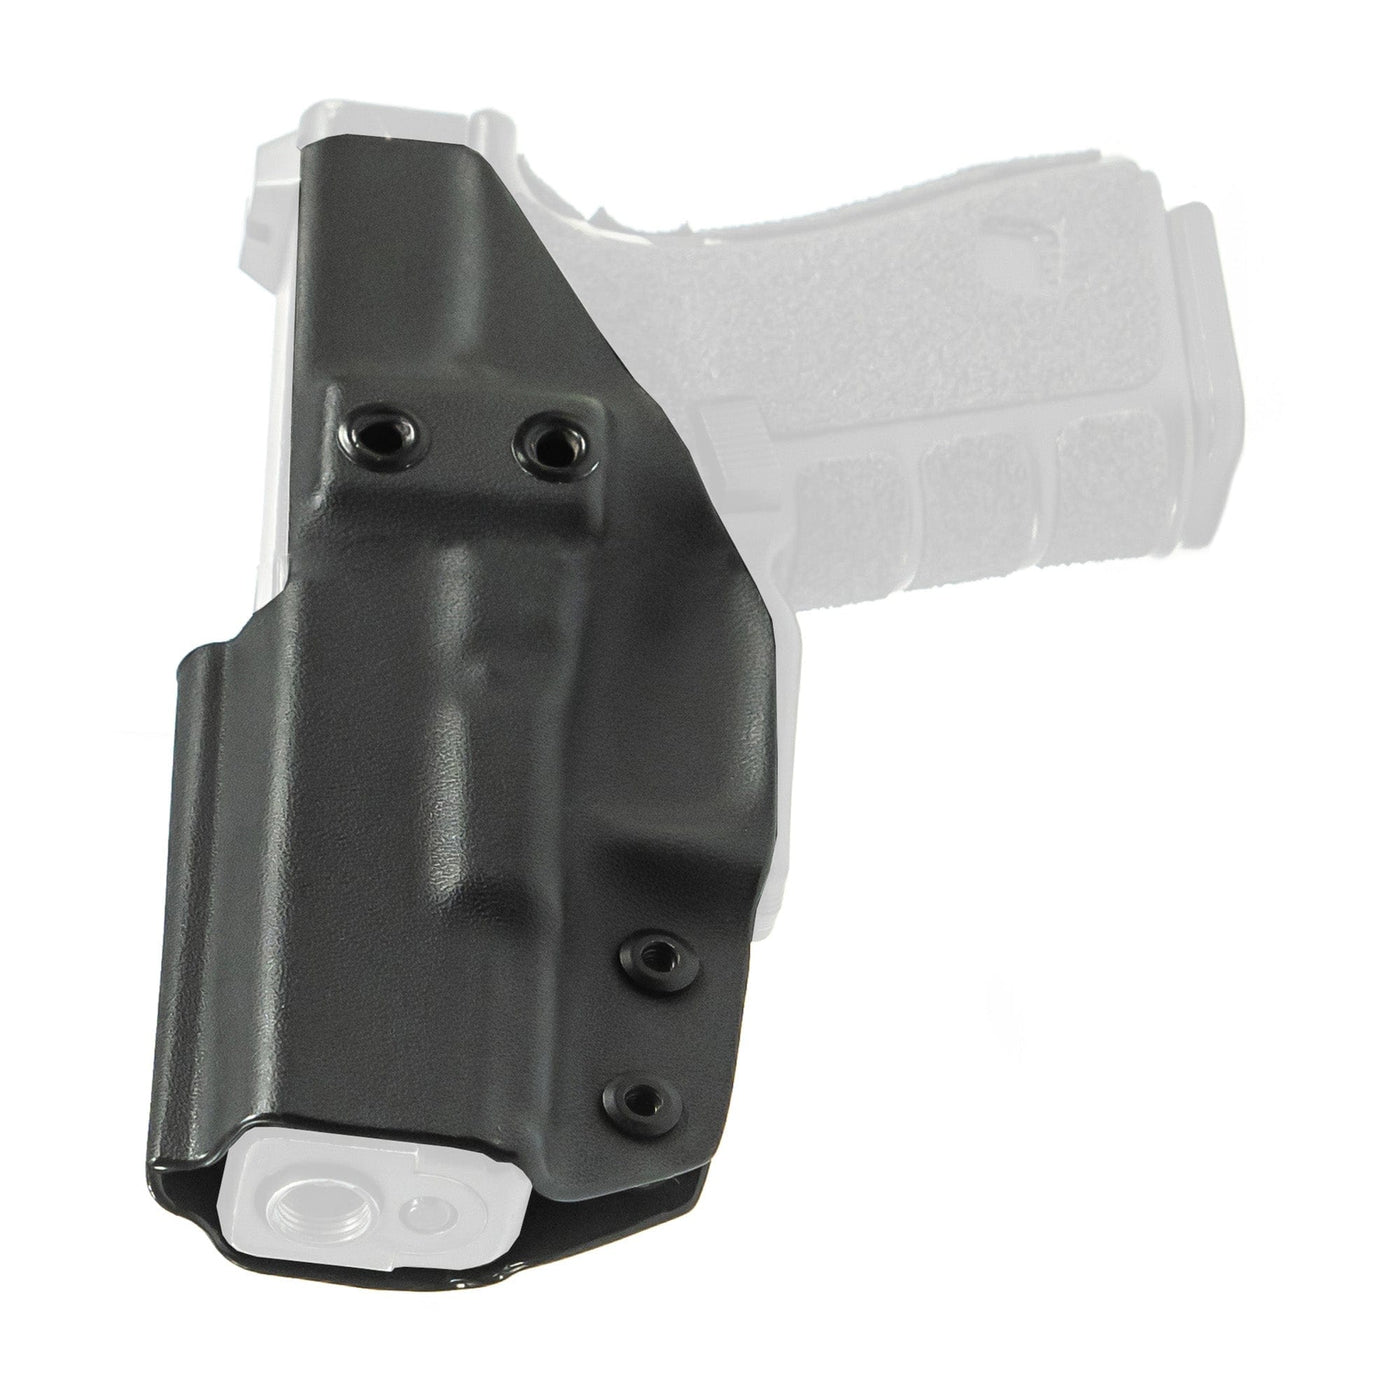 Tagua Tagua Dsrptor Or Spfd Hlct Ambi Blk Holsters